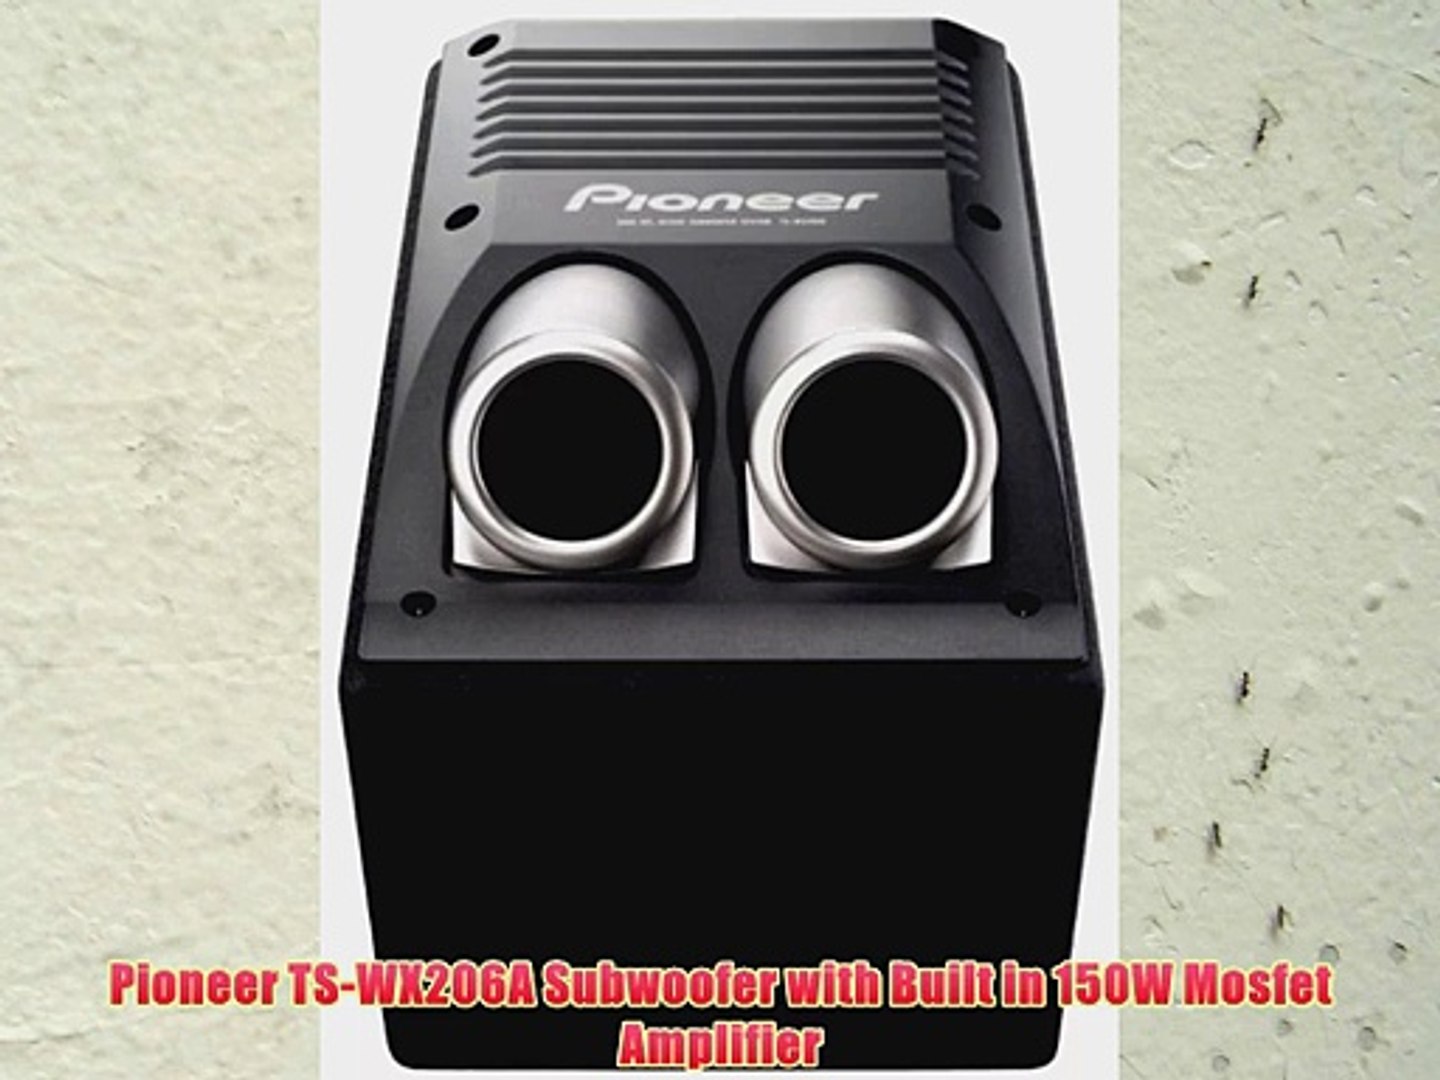 Pioneer Subwoofer with Built 150W Mosfet Amplifier - video Dailymotion